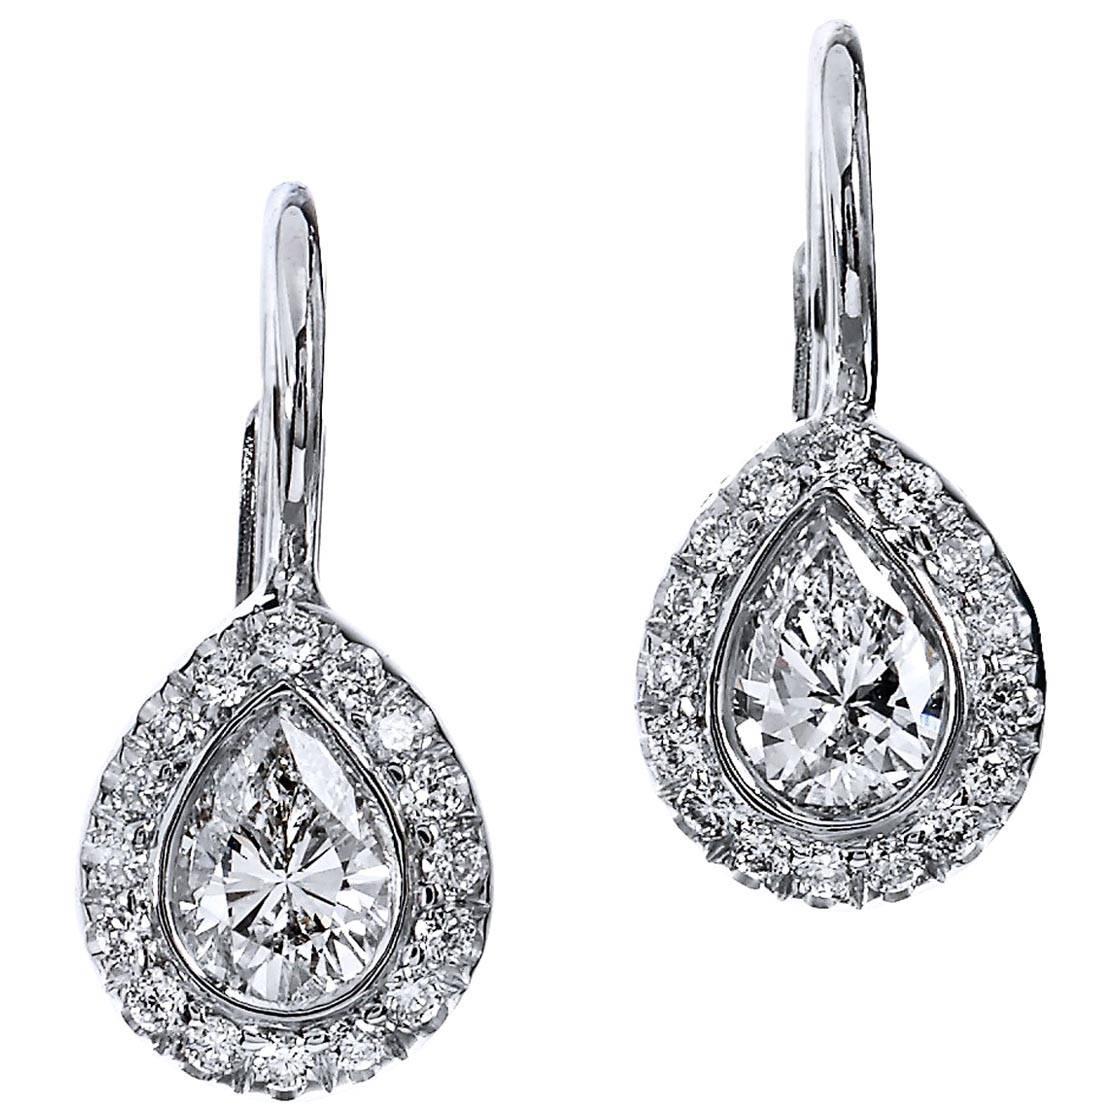 0.41 Carat Pear Shaped Diamonds in 18 karat White Gold with Lever-Back Earrings For Sale